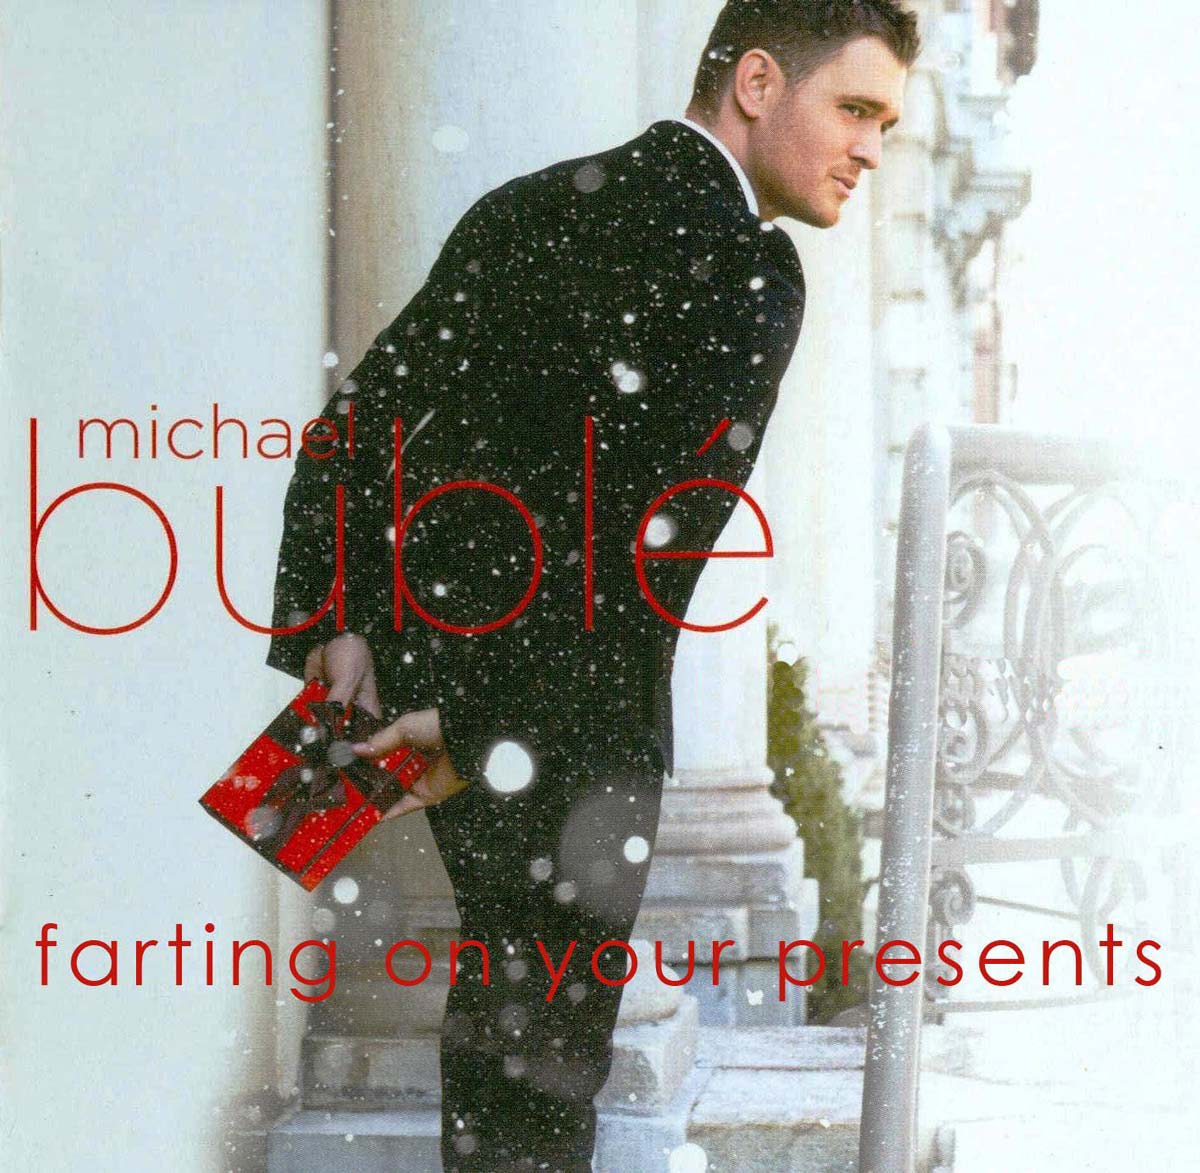 It’s almost that time of year for my favorite album